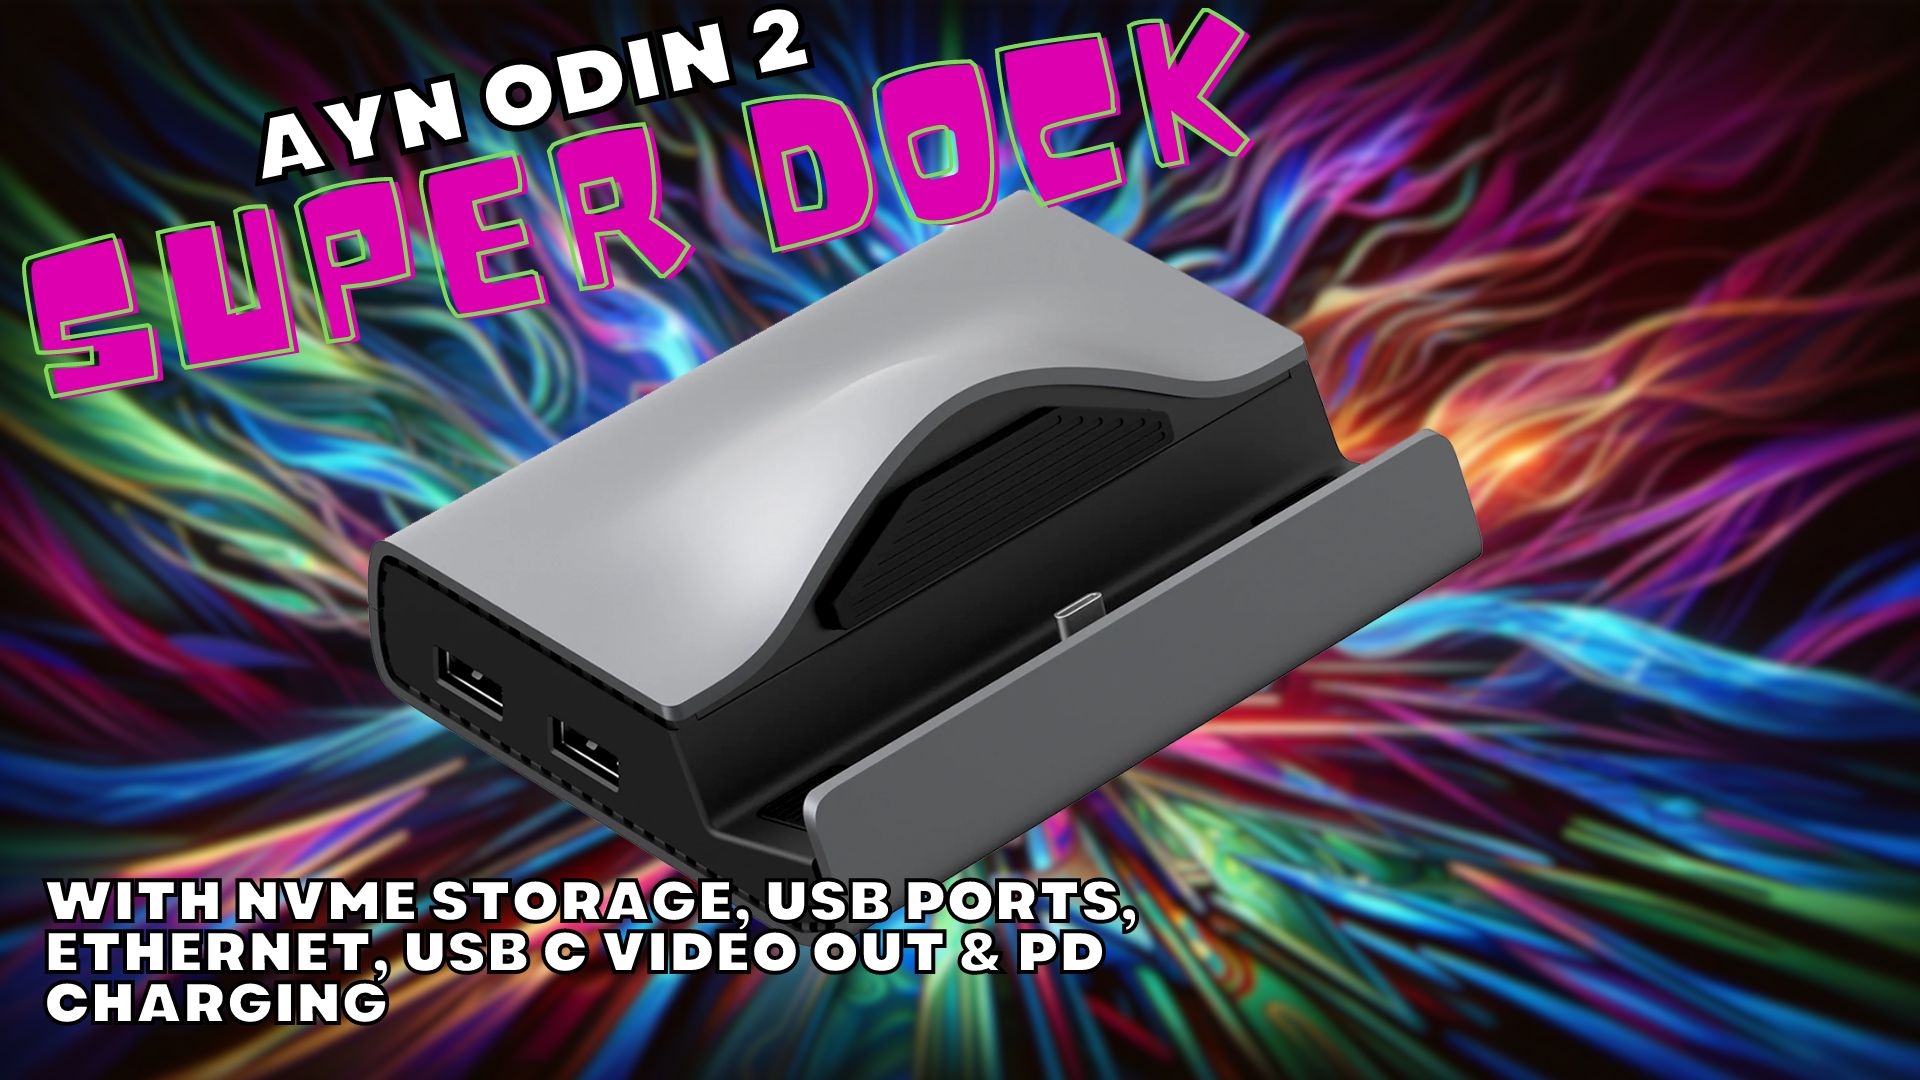 AYN Odin 2 Super Dock review with video